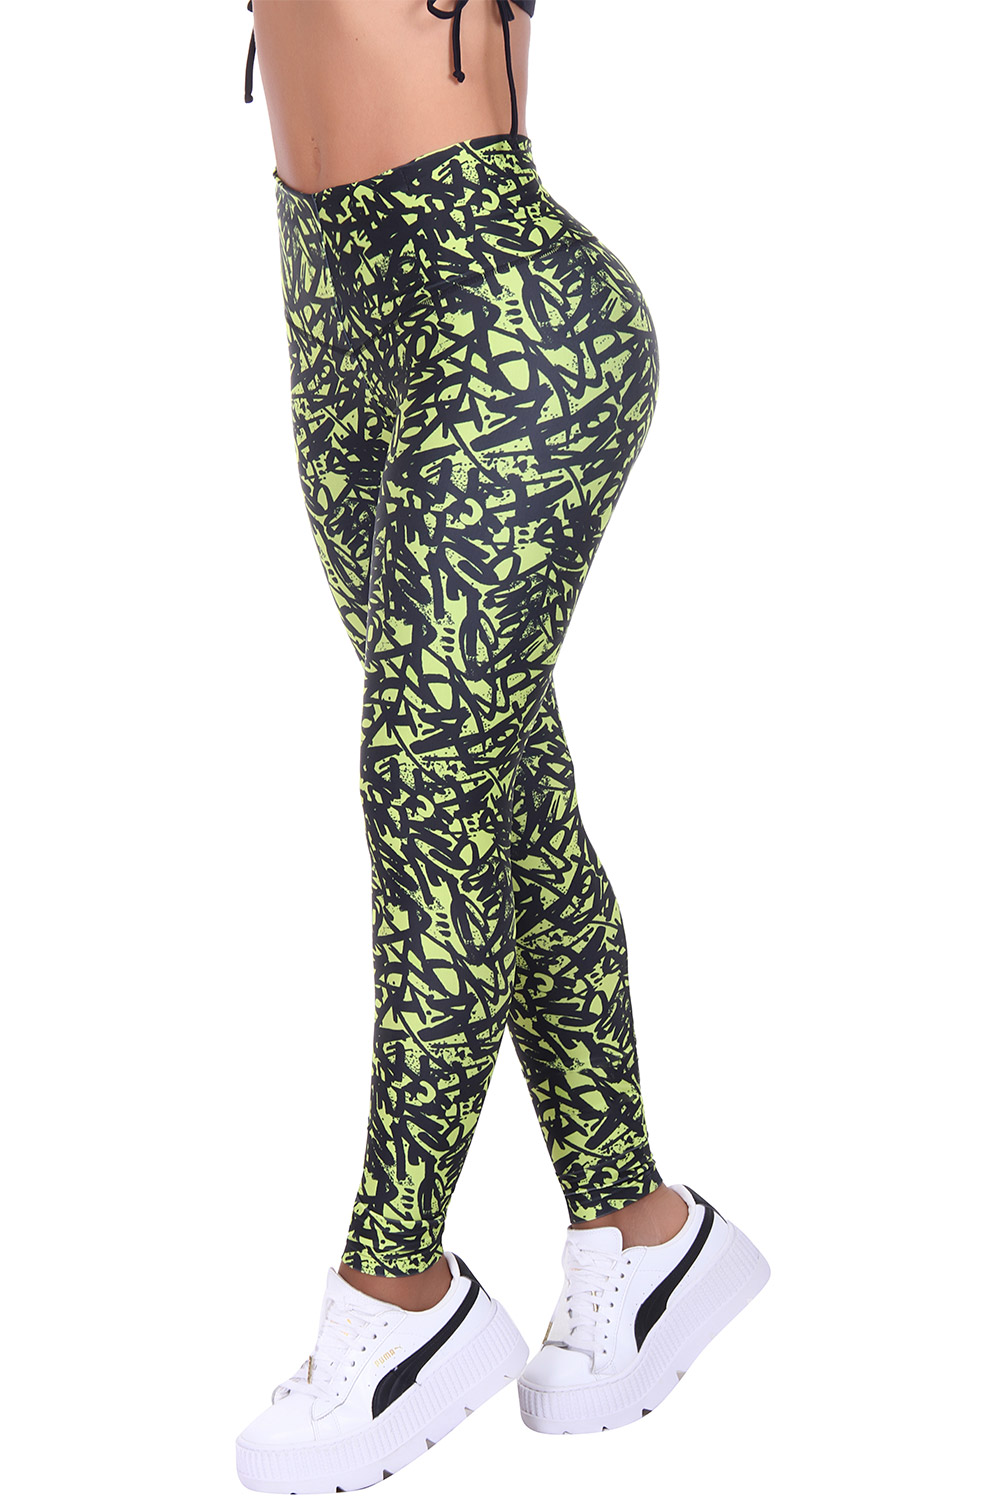 Bon Bon Up – Compression Leggings with Internal Body Shapers and Butt Lifters